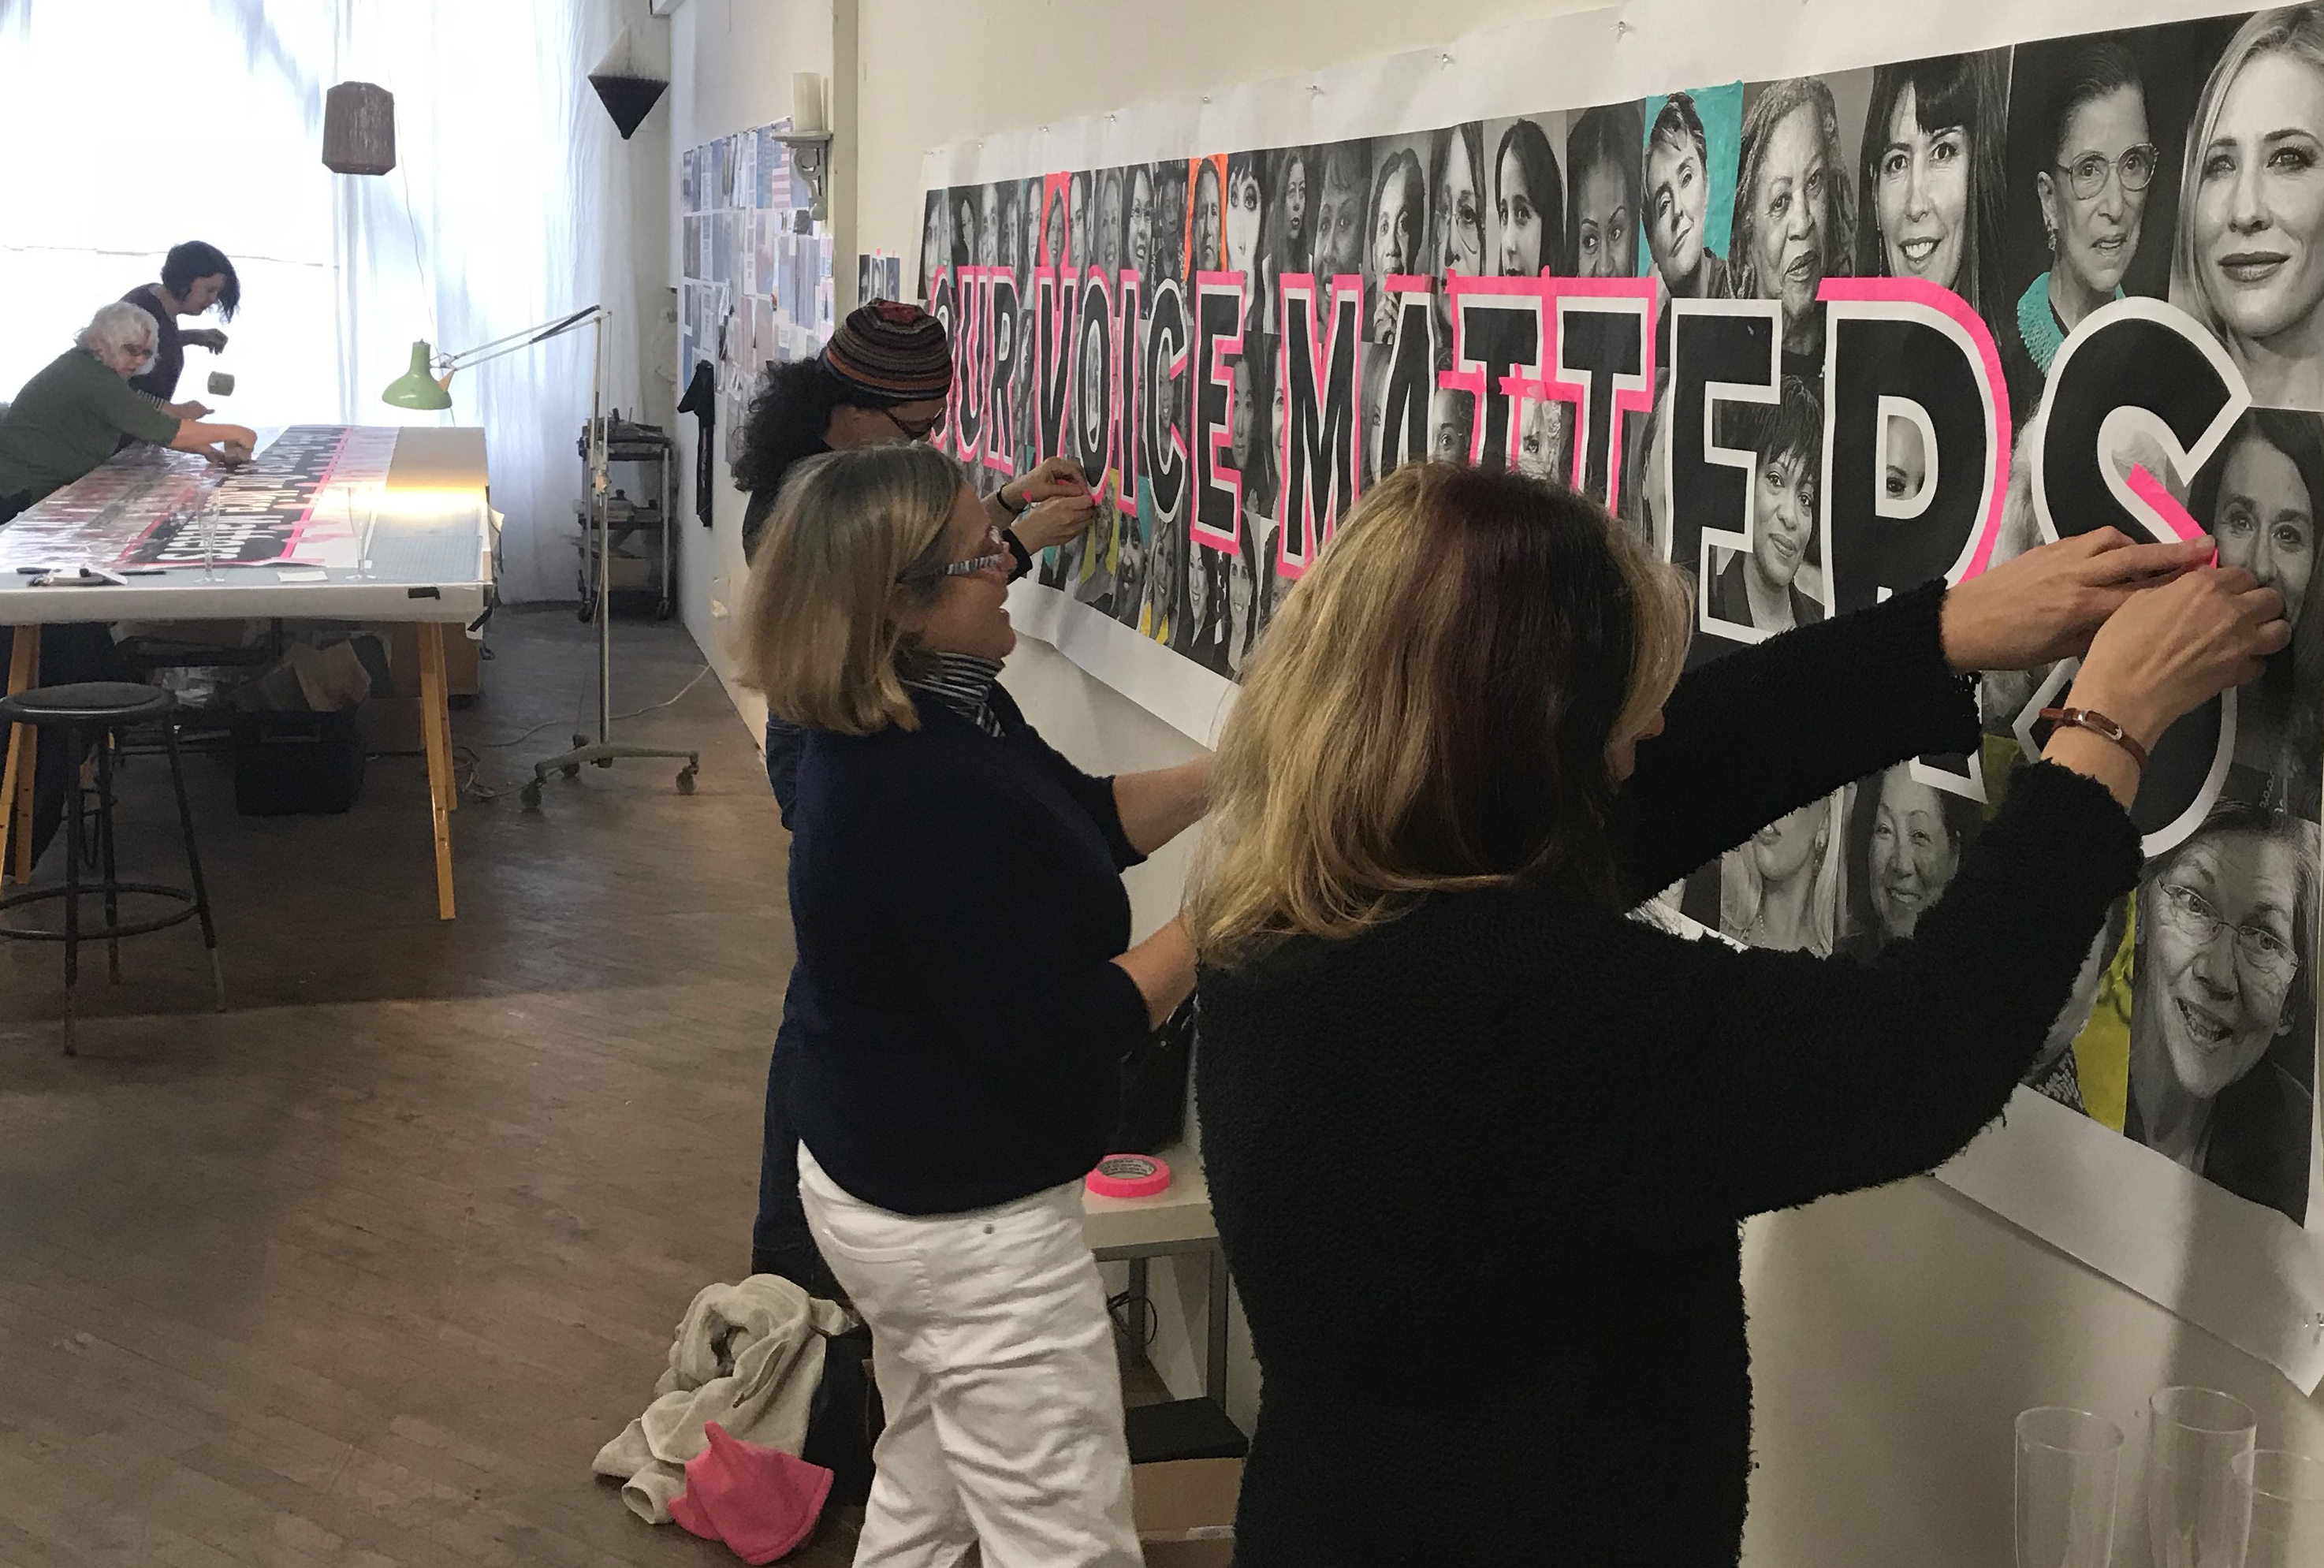 Volunteers outline bold letters in pink tape to increase visibility for the march.